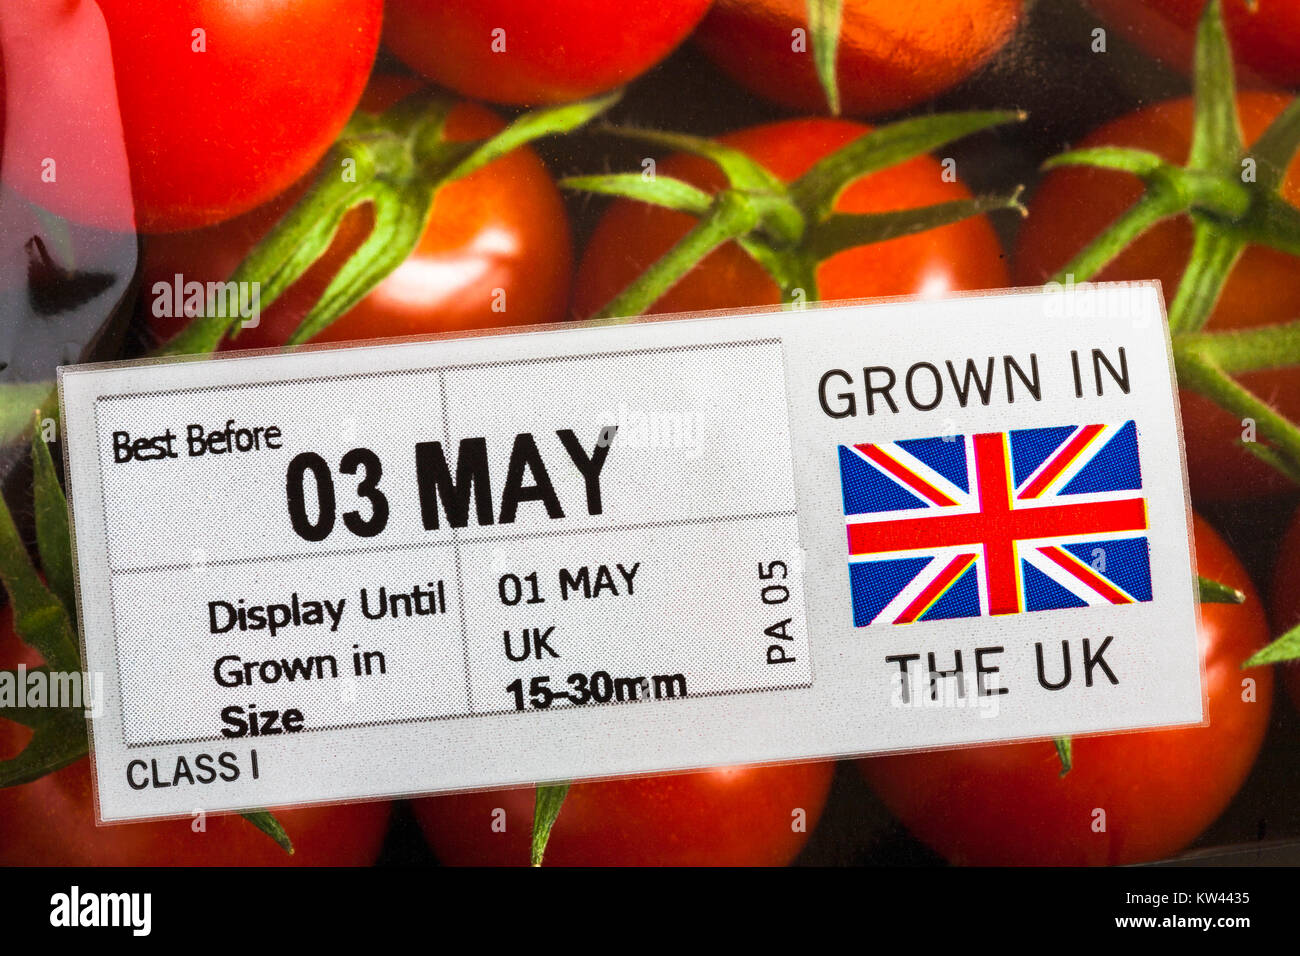 Grown in the UK label on pack of tomatoes Stock Photo